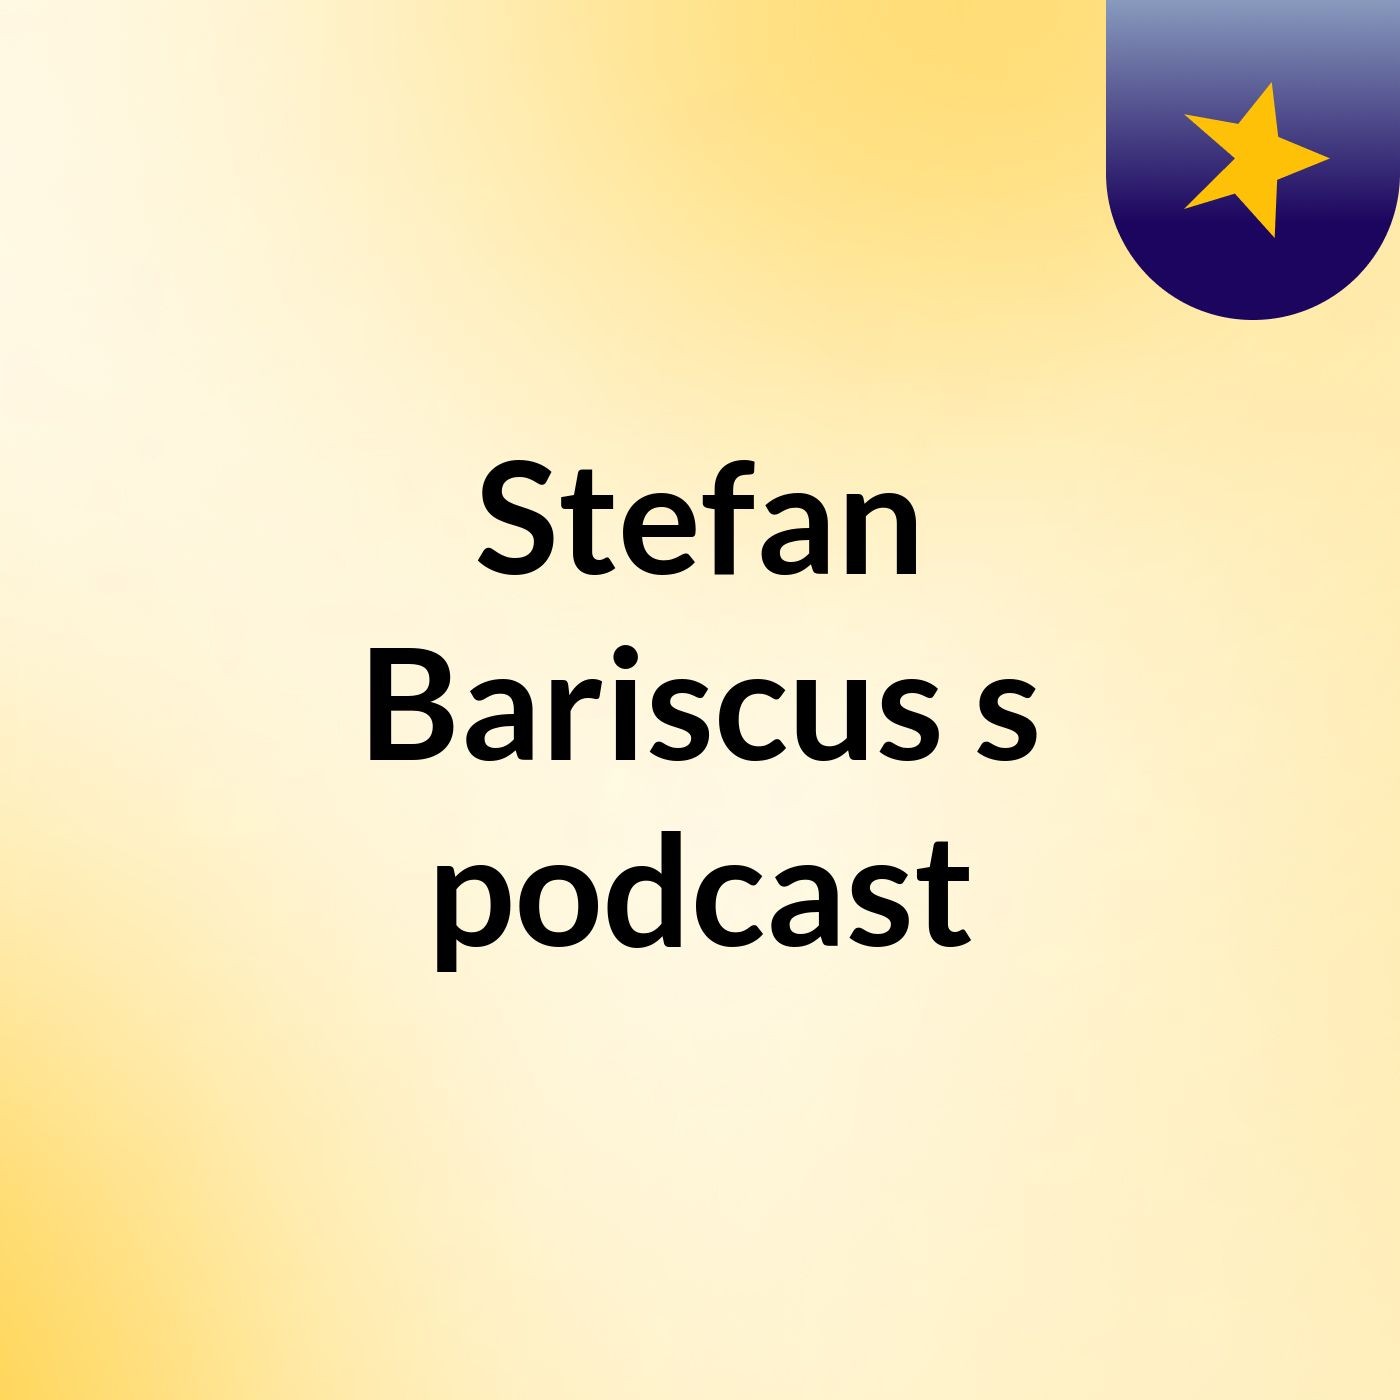 Stefan Bariscus's podcast